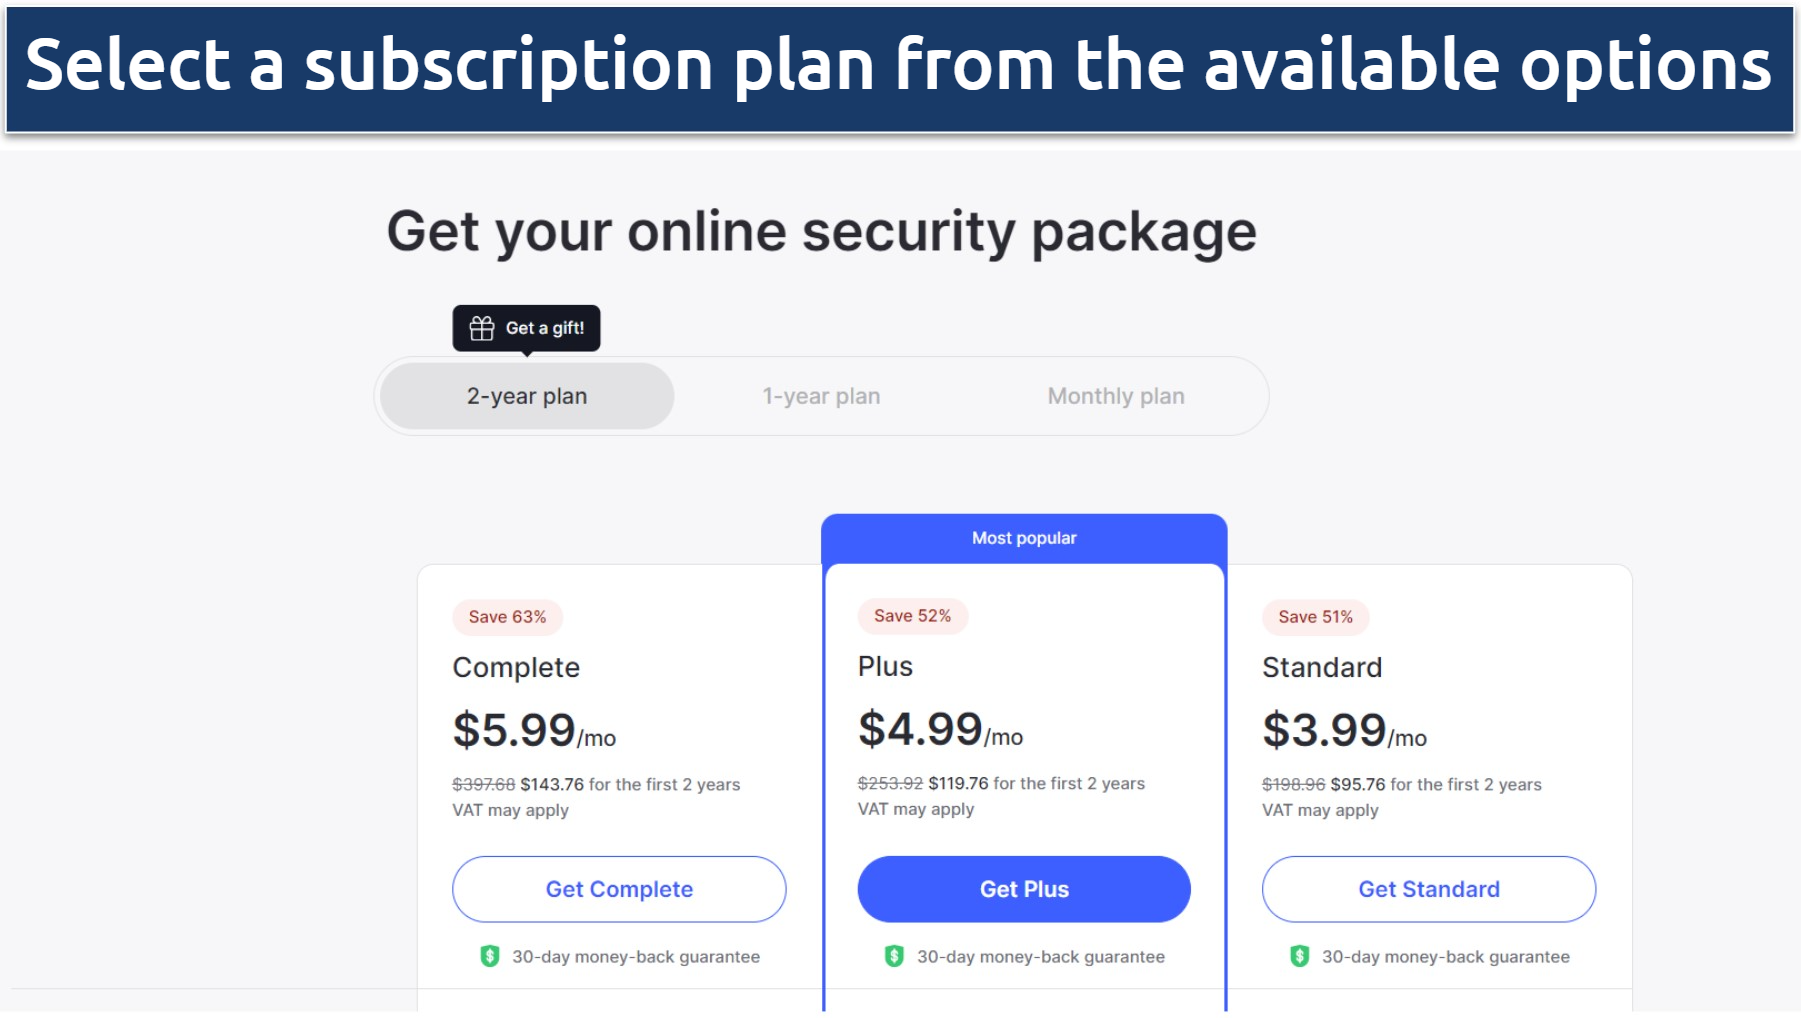 Image showing all the subscription plans offered by NordVPN